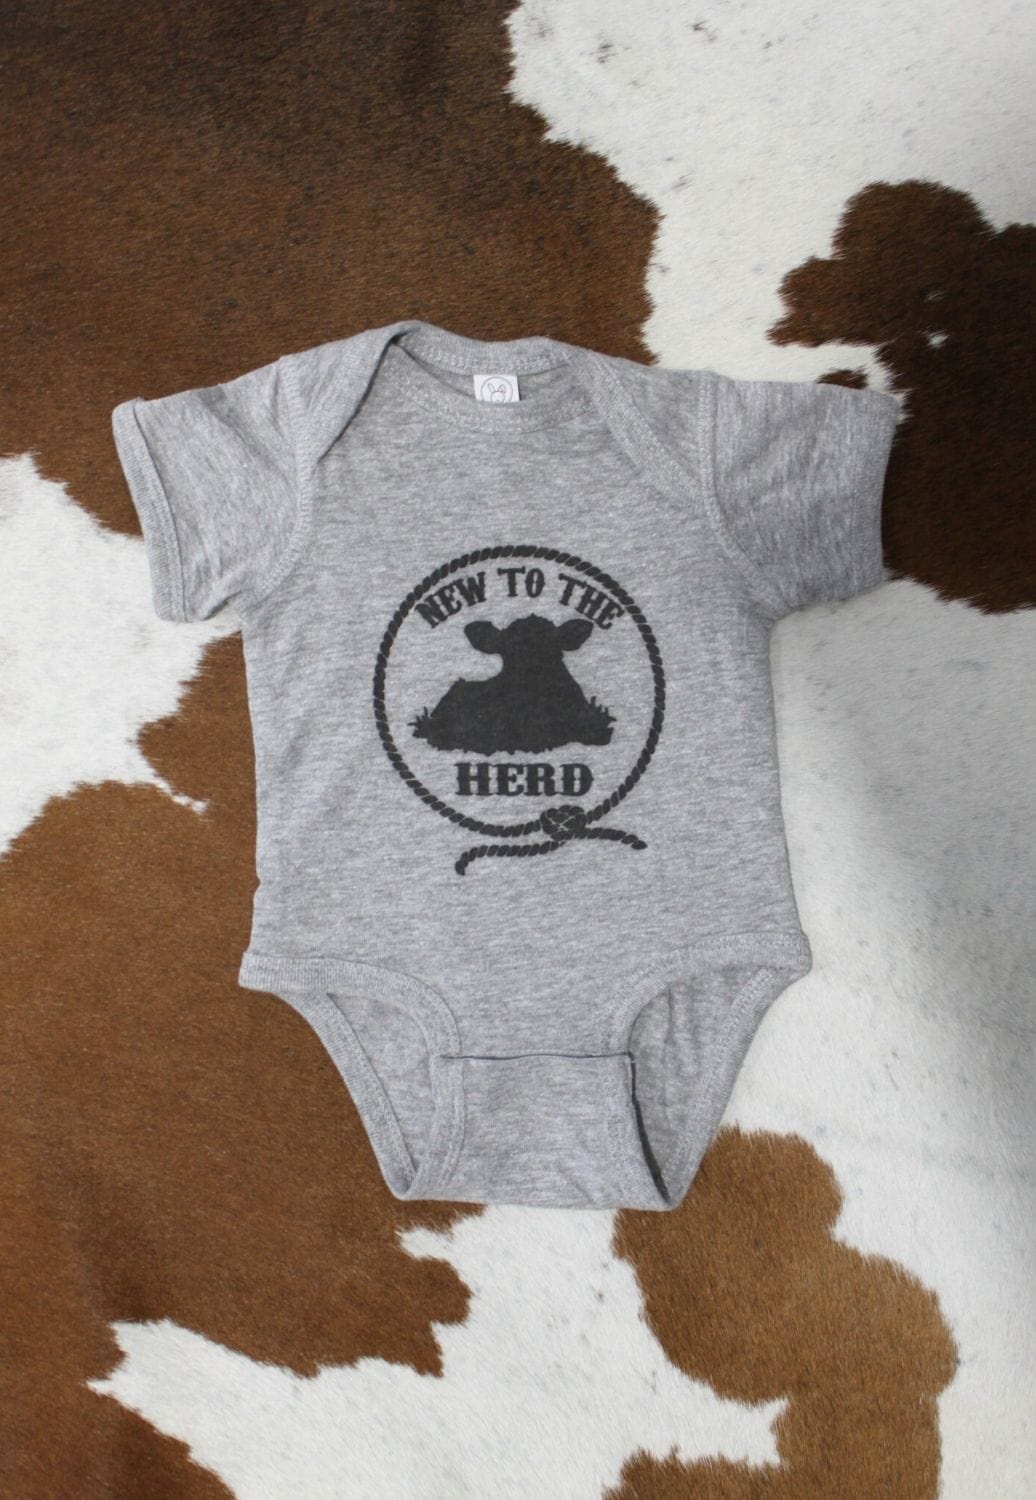 The Whole Herd CLOTHING-Infants The Whole Herd New To The Herd Onesie